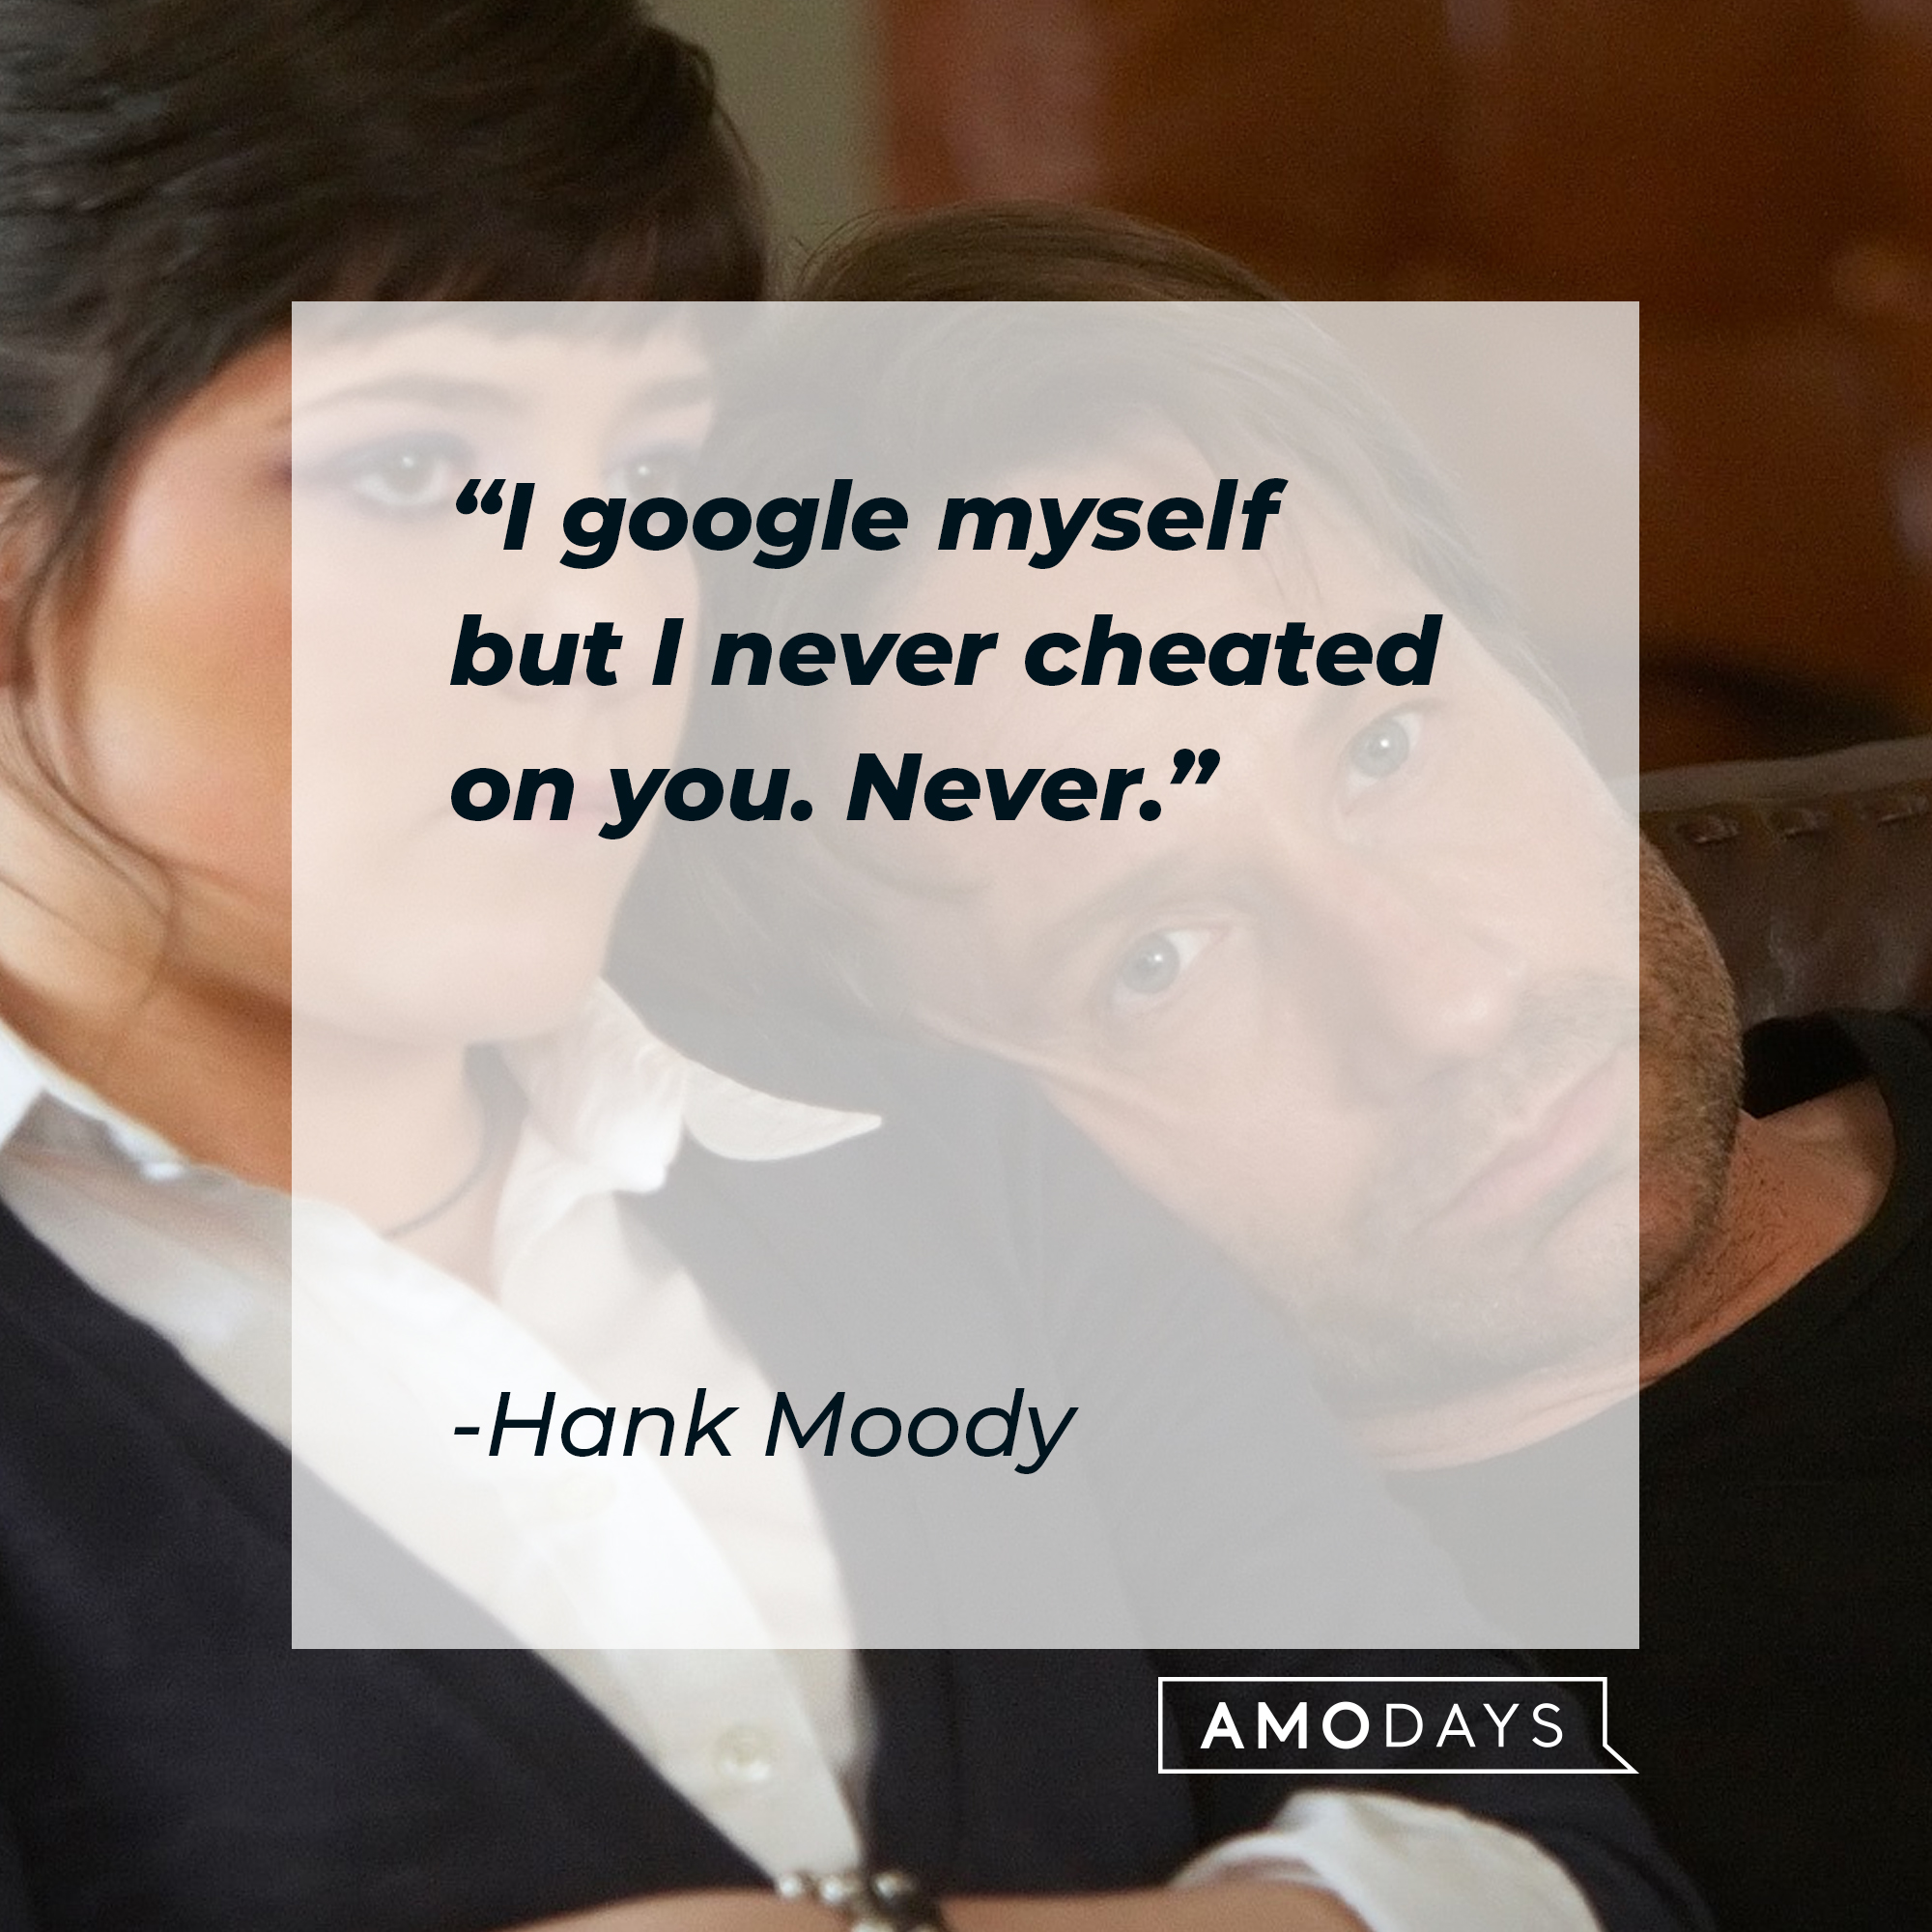 Hank Moody's quote: "I google myself but I never cheated on you. Never." | Image: AmoDays